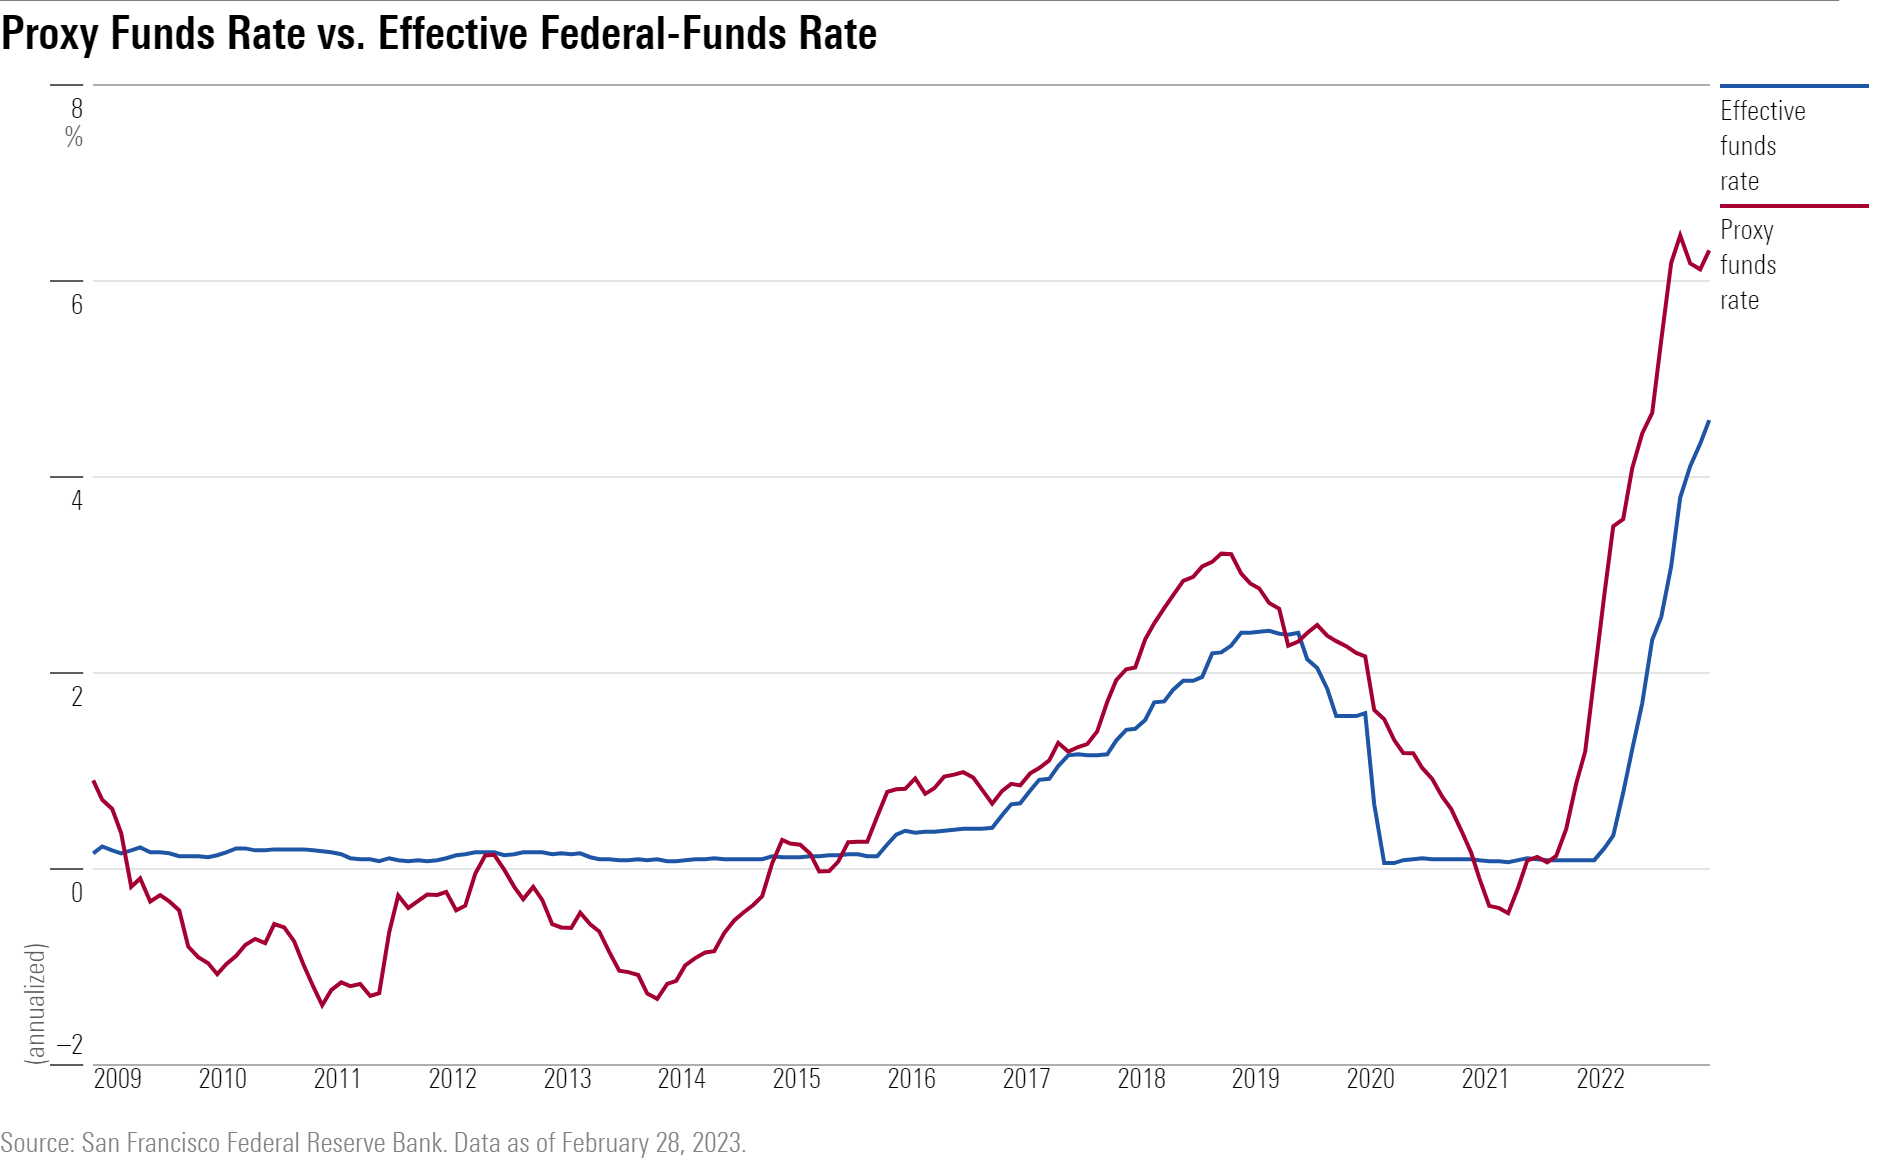 A line chart showing the proxy funds rate has exceeded the effective federal-funds rate, indicating rates are in restrictive territory.